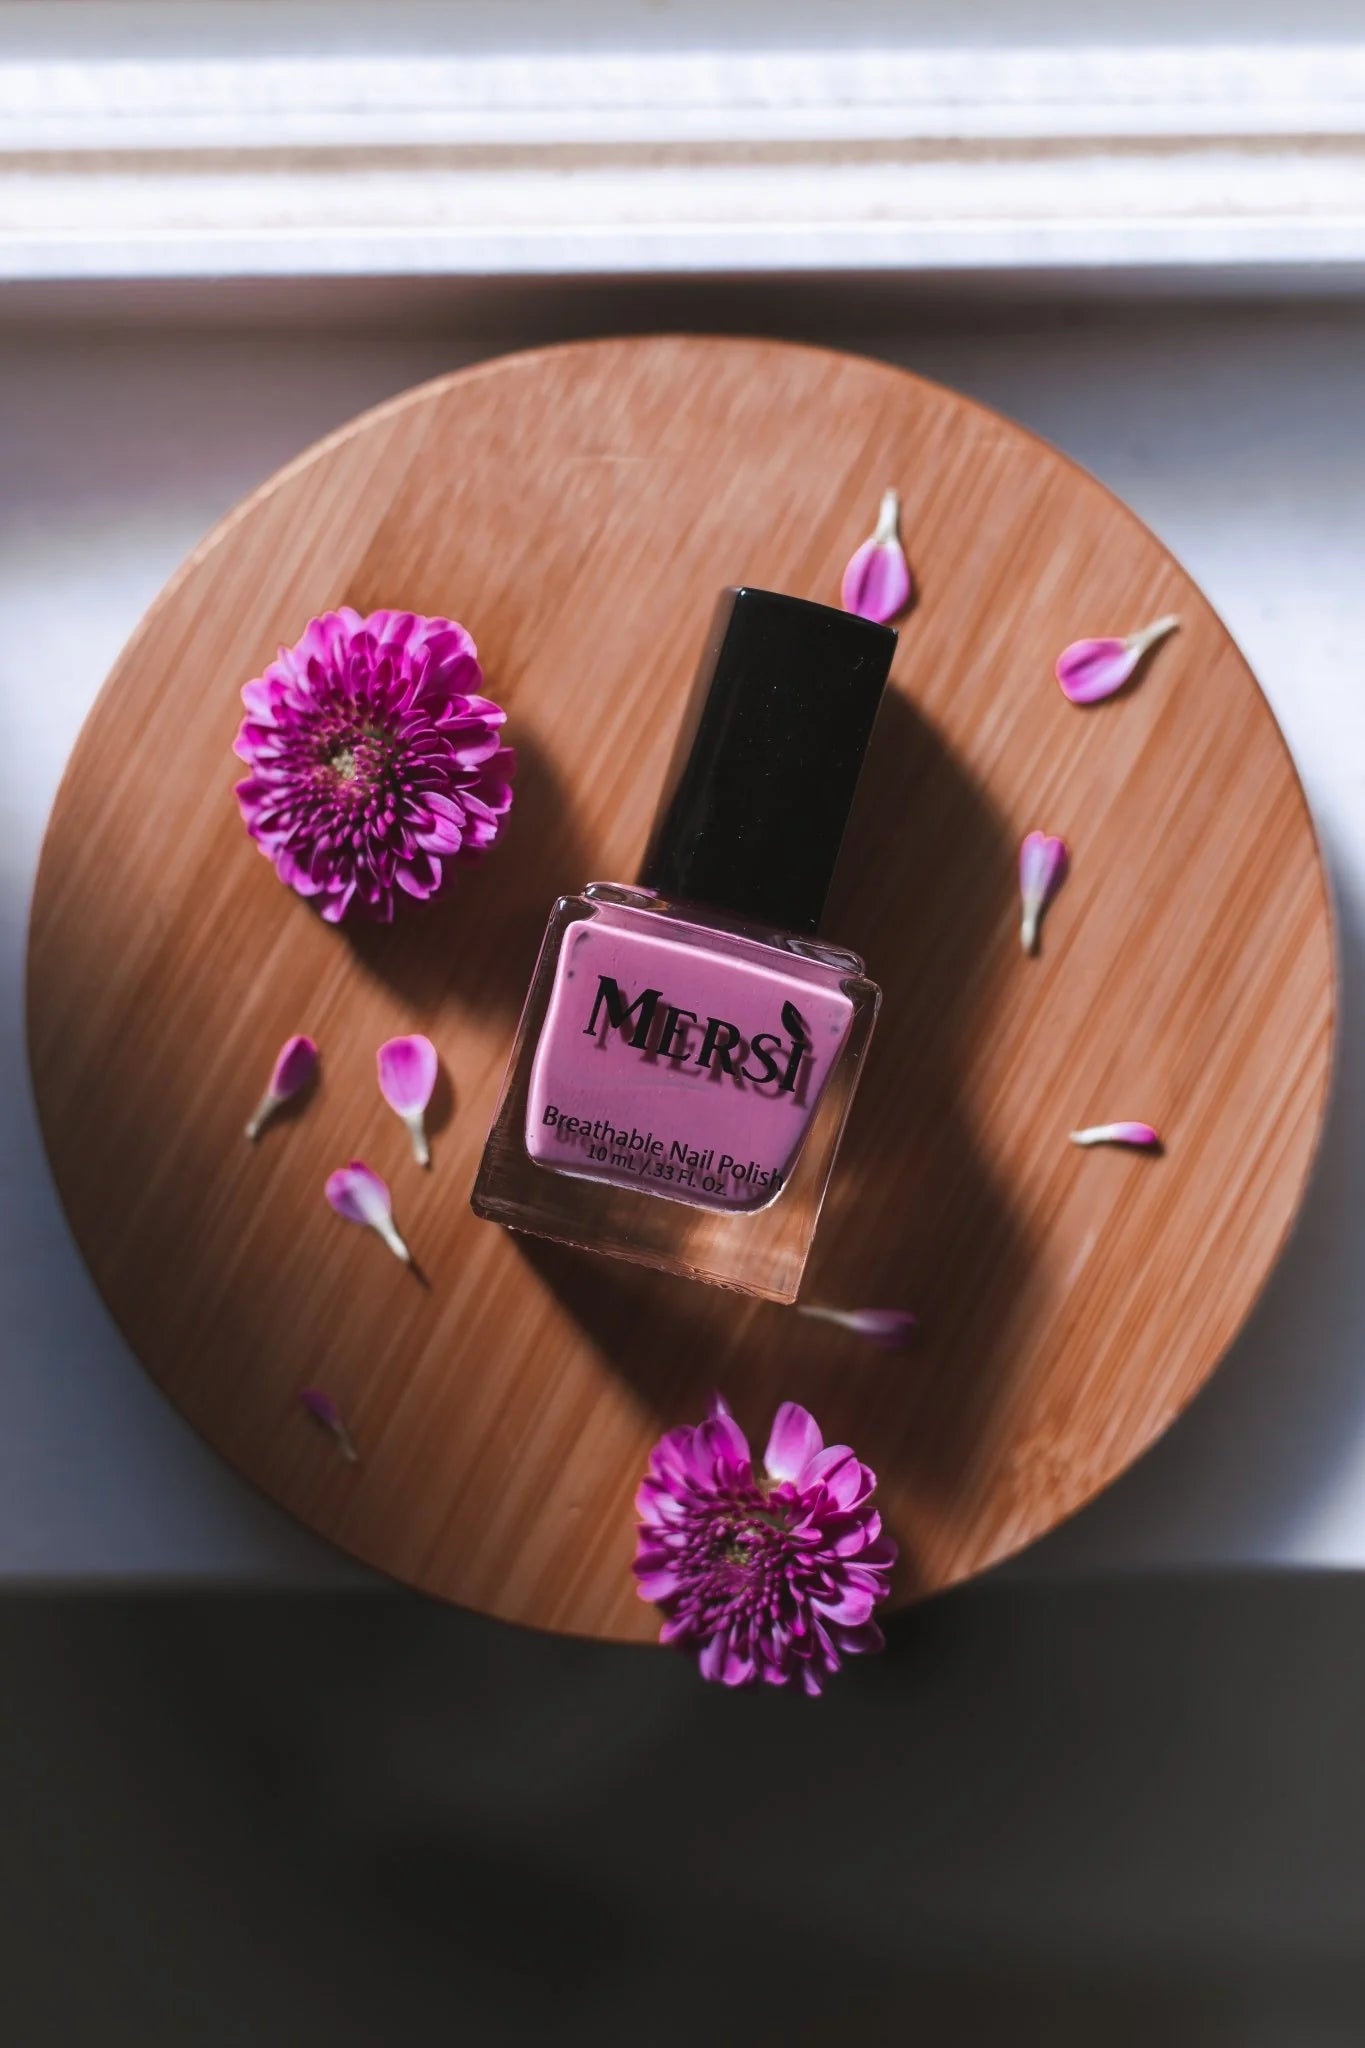 Halal Nail Polish: What Exactly is it?